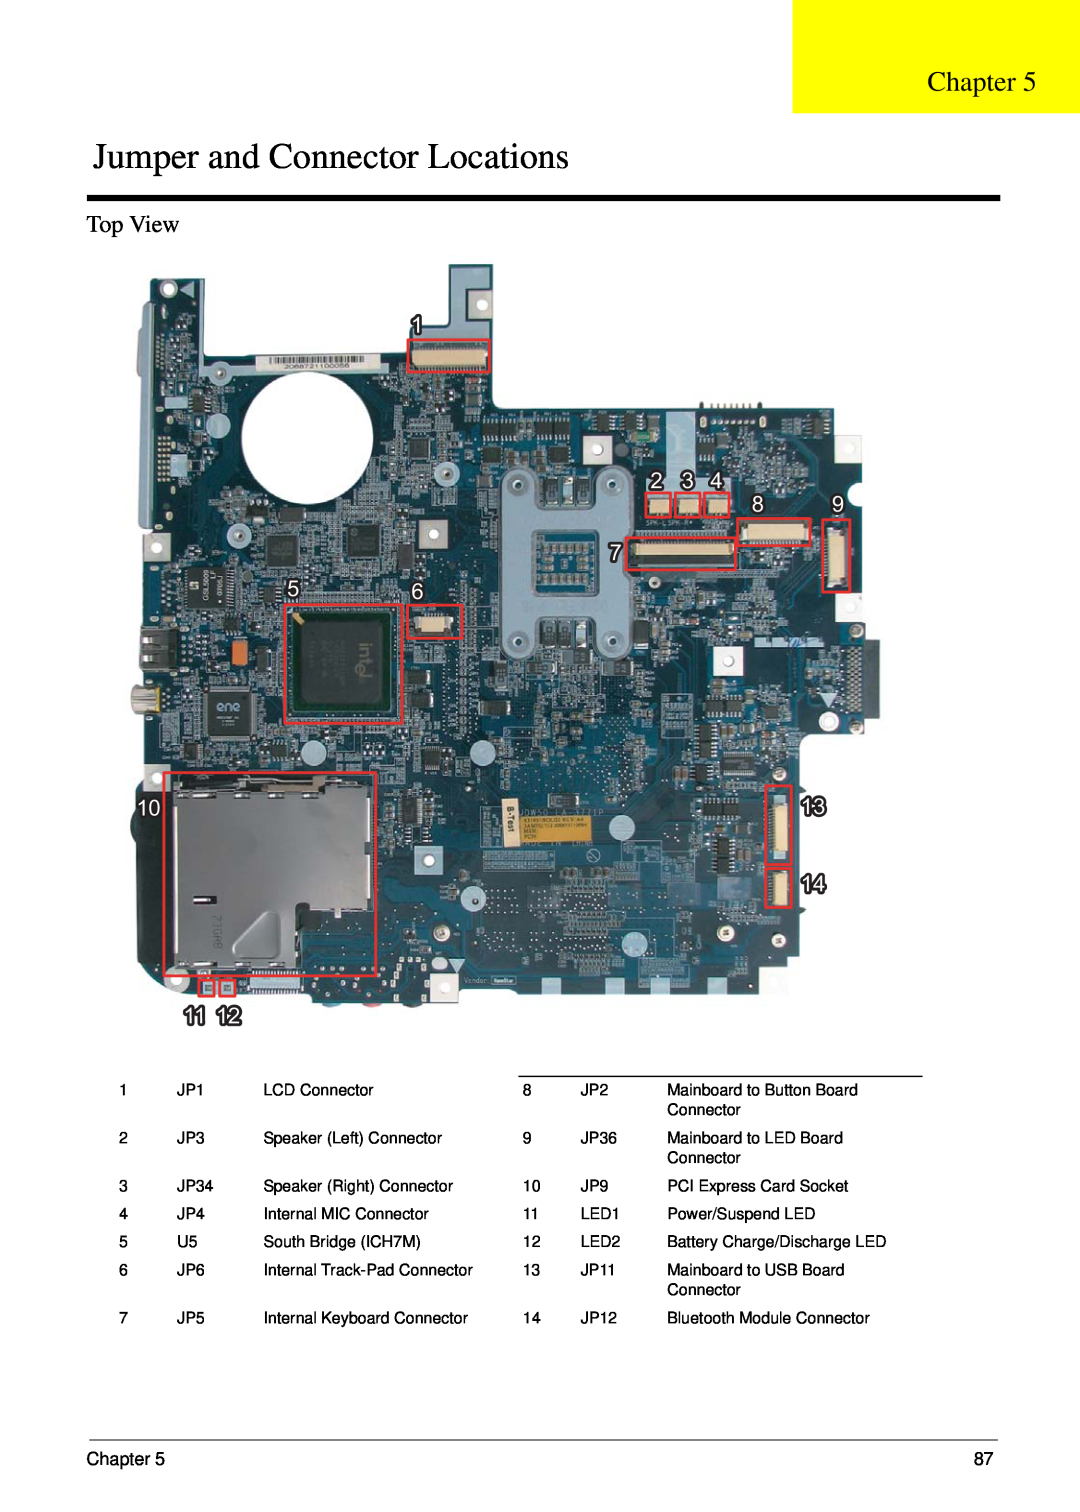 Acer 5710G, 5310G manual Jumper and Connector Locations, Top View, Chapter 